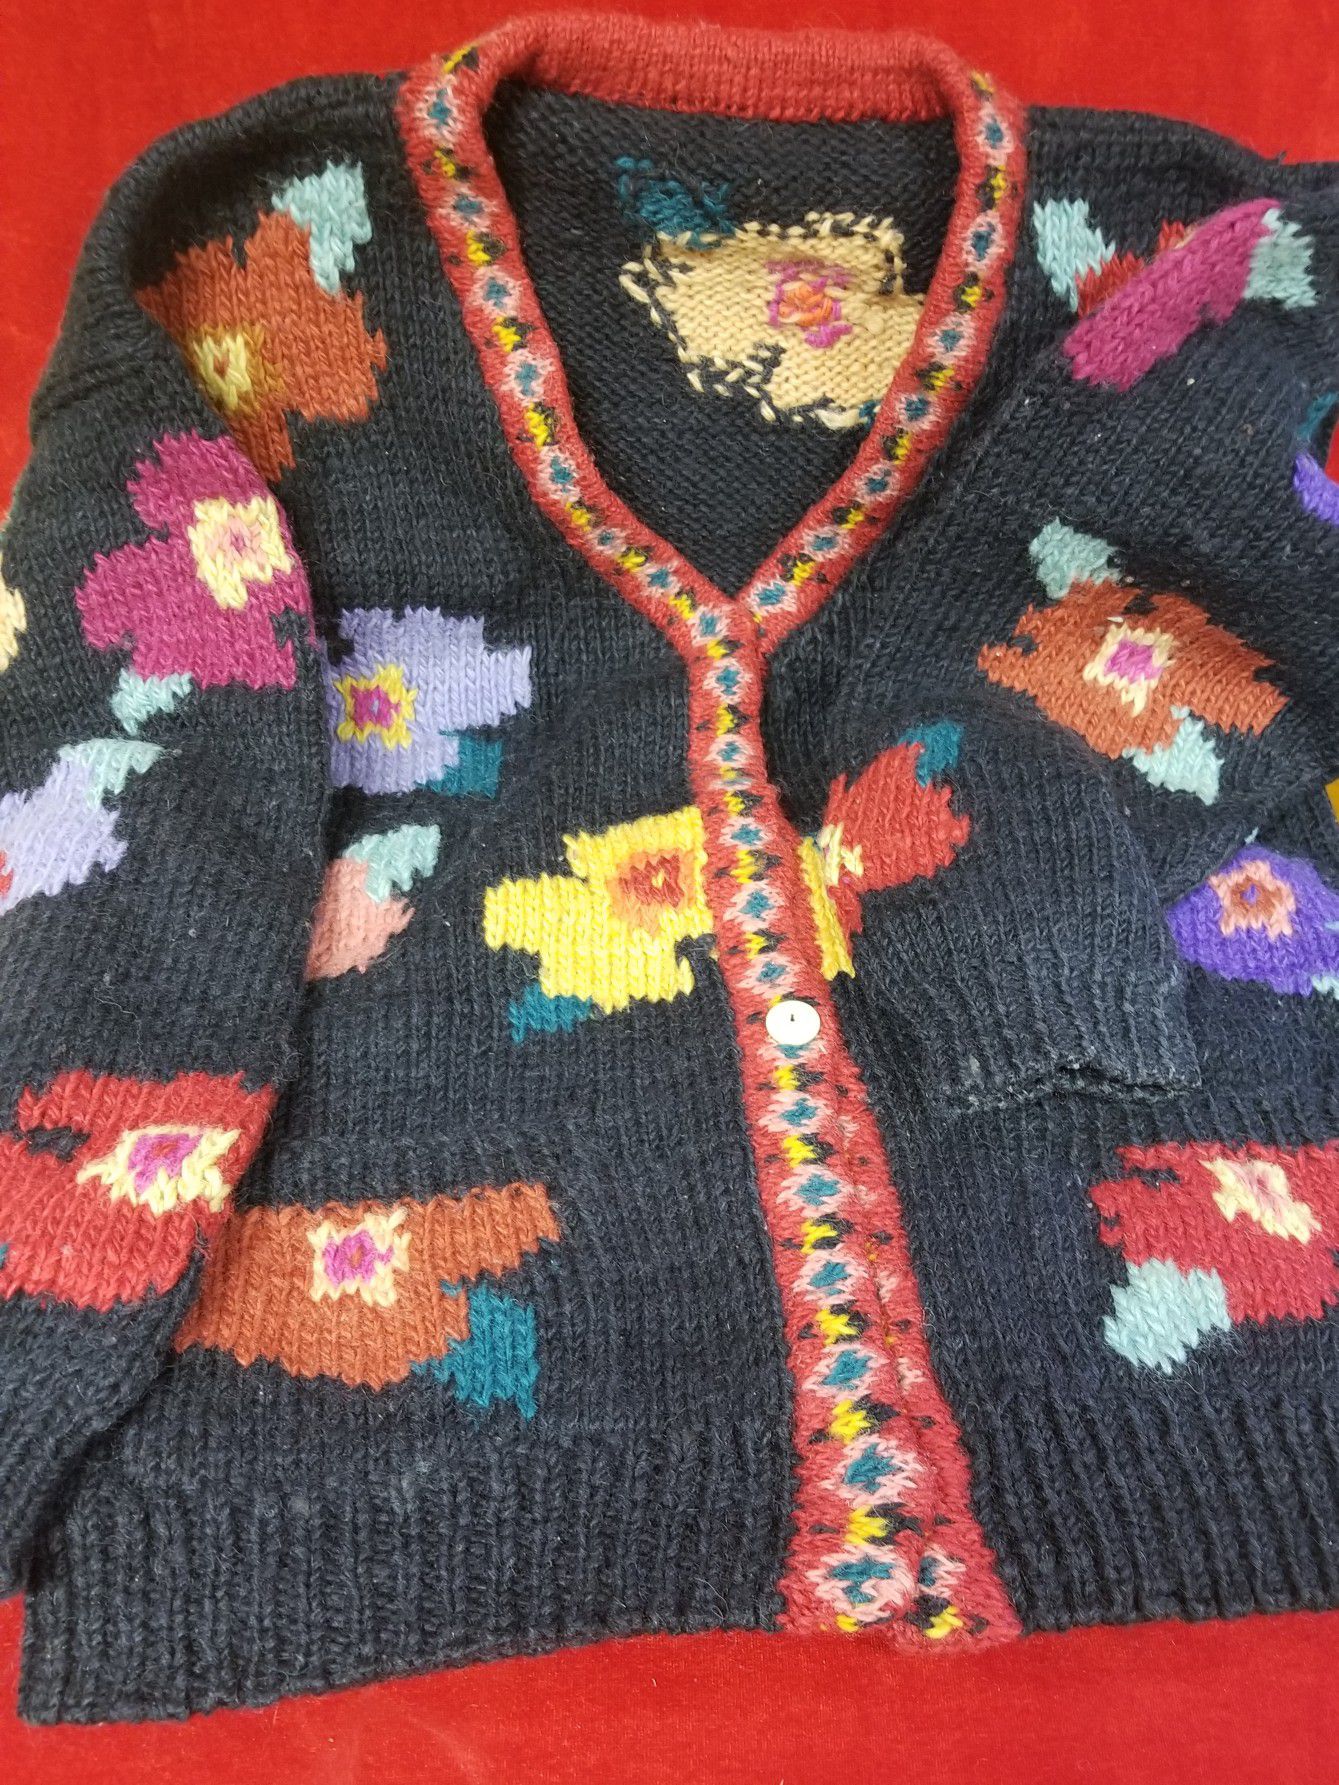 Hand knitted sweater size large. Made in Nepal